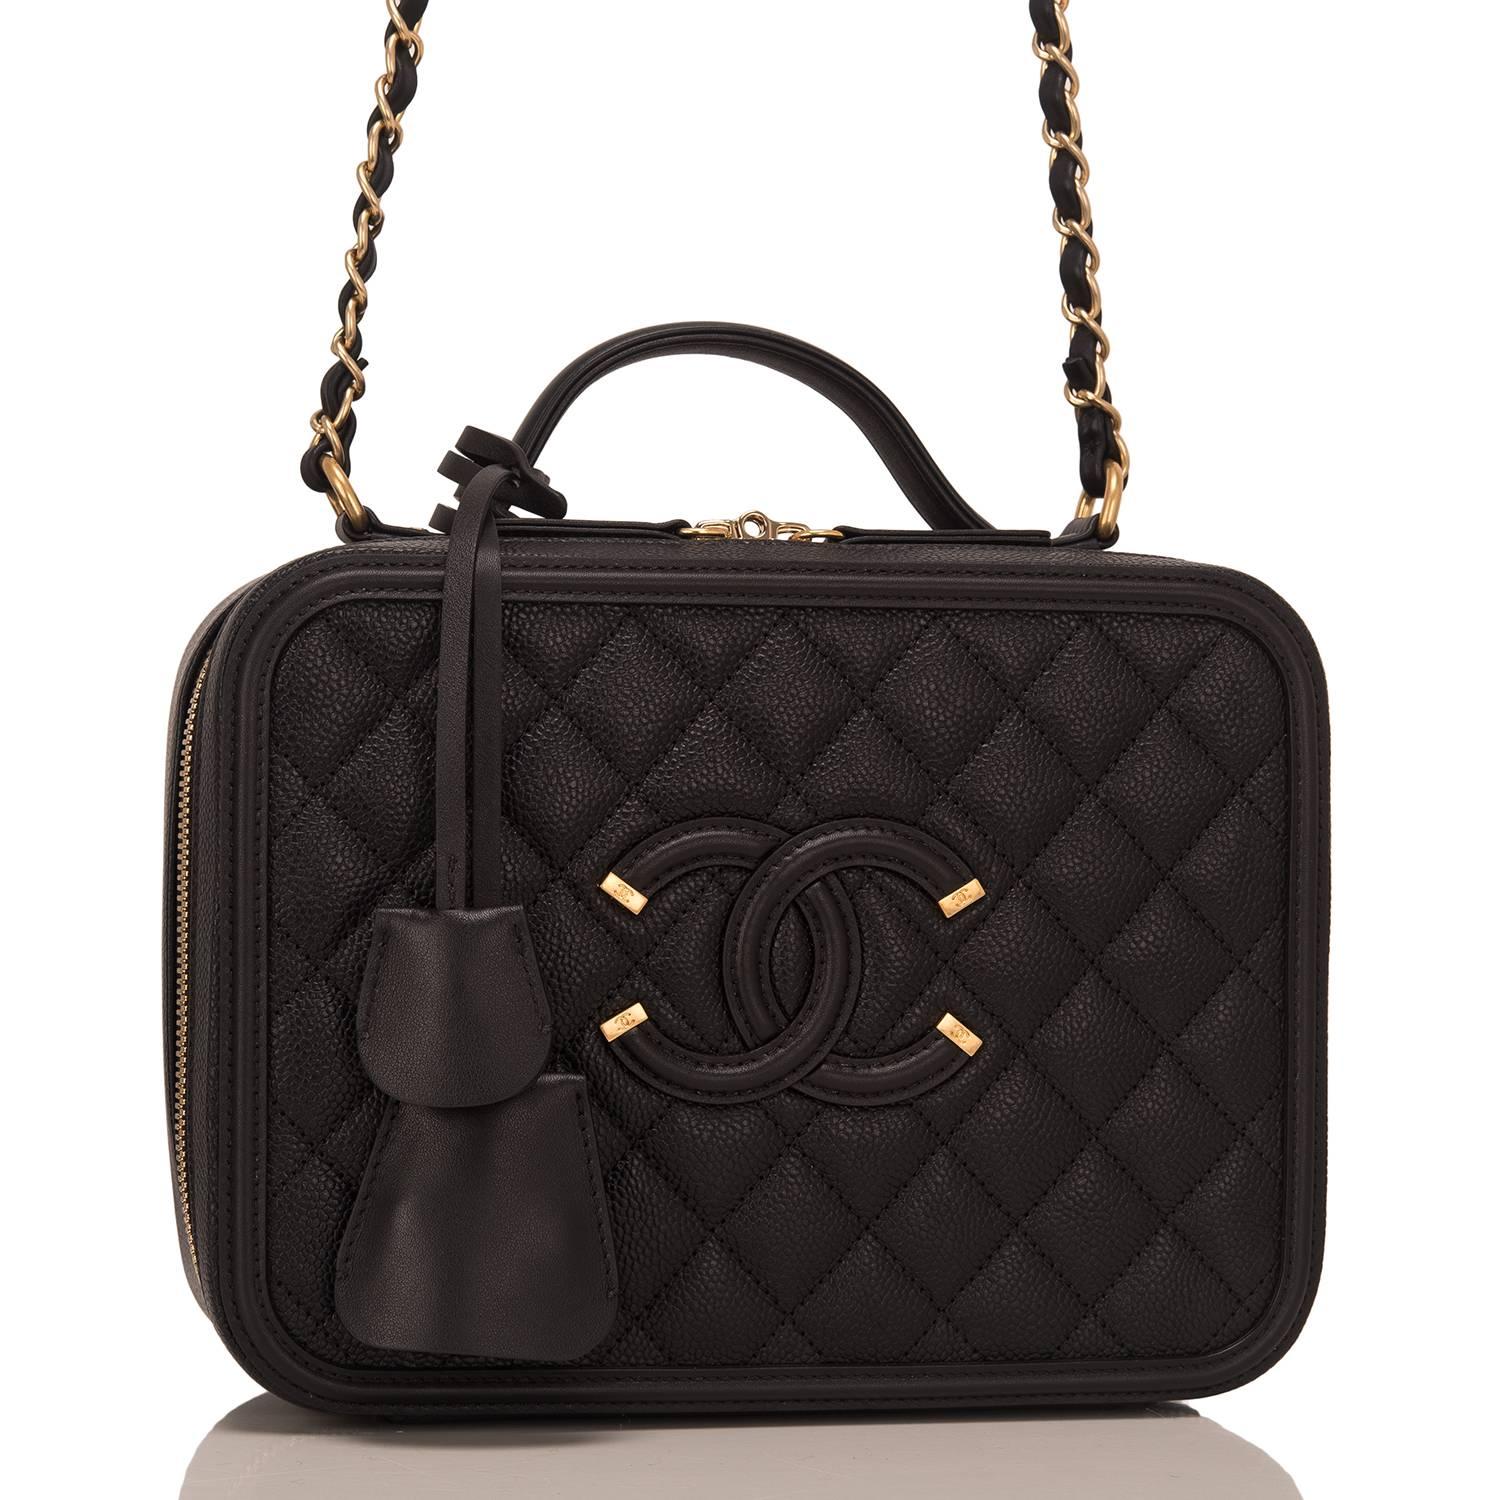 Chanel medium Vanity Case of black caviar leather with gold tone hardware.

This bag features Chanel's signature CC logo sewn on the front, a gold tone CC lock with a clochette, a matching key with another clochette, zip around closure, a leather